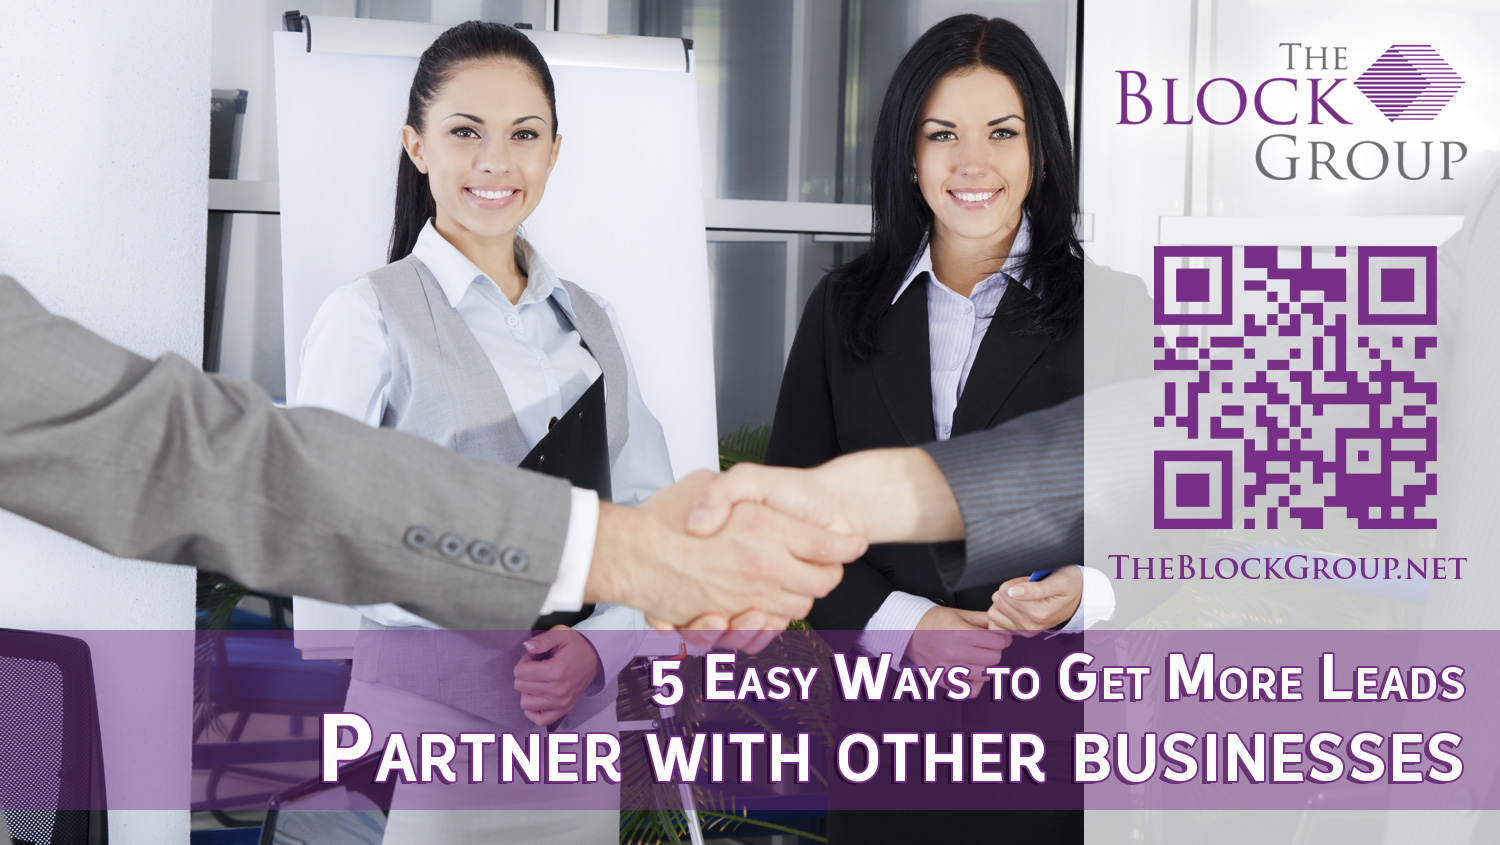 007-Partner-with-other-businesses